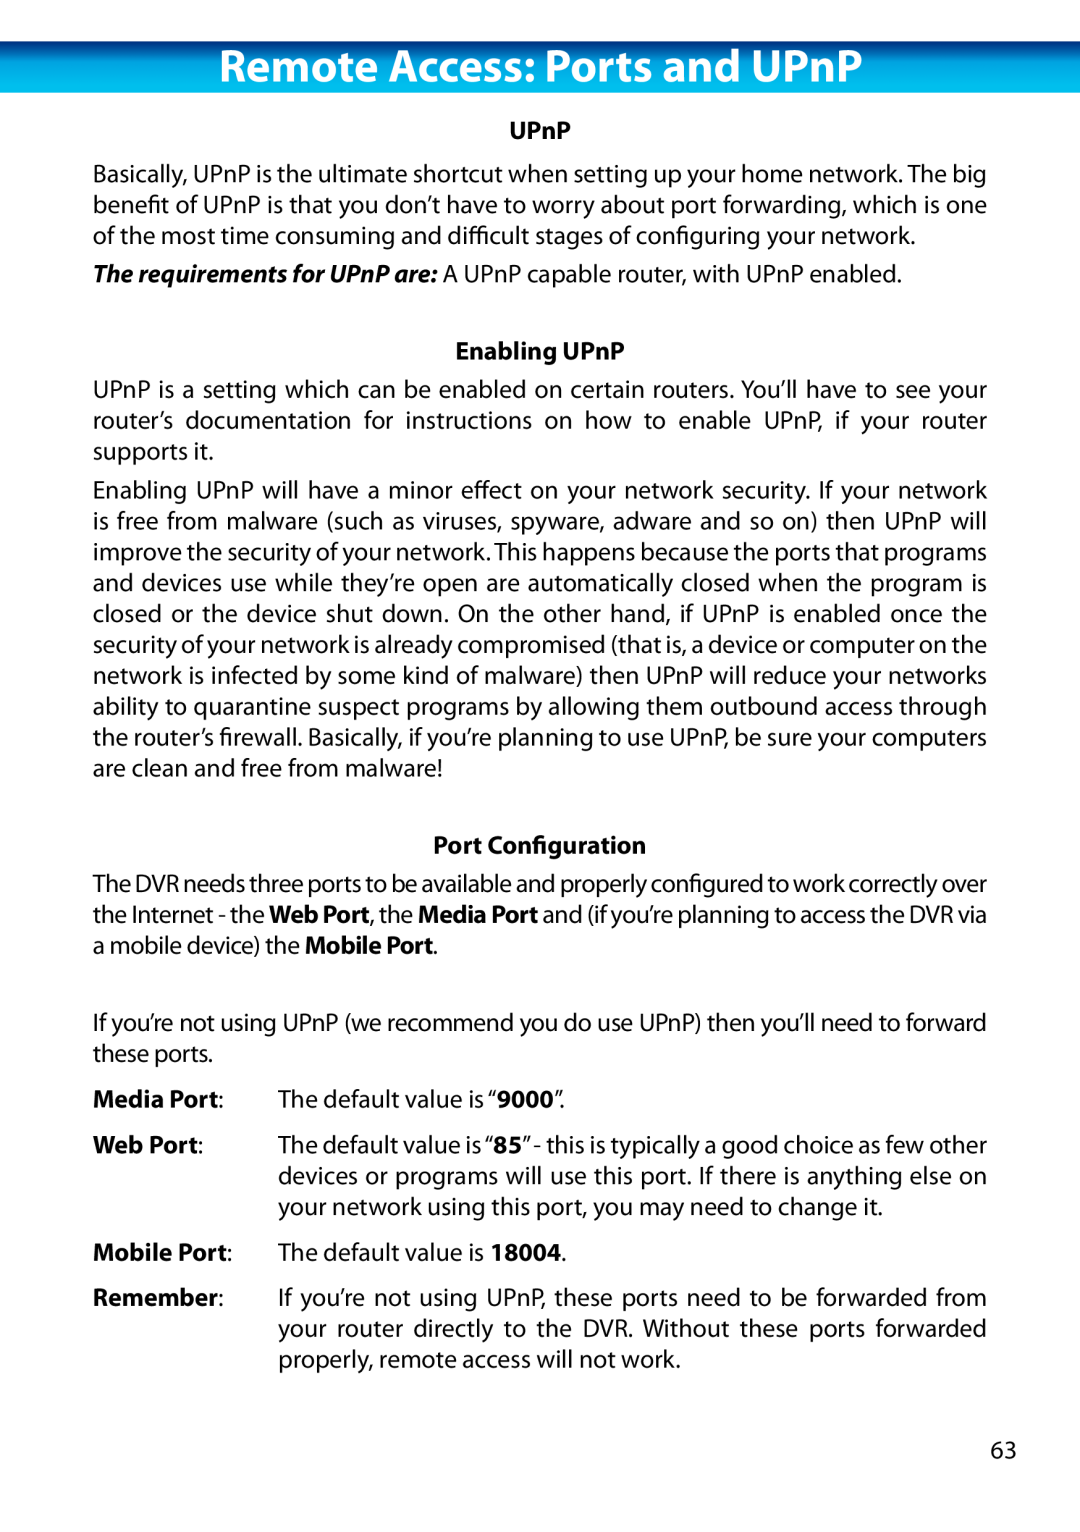 Swann H.264 manual Remote Access: Ports and UPnP, Enabling UPnP, Port Configuration 